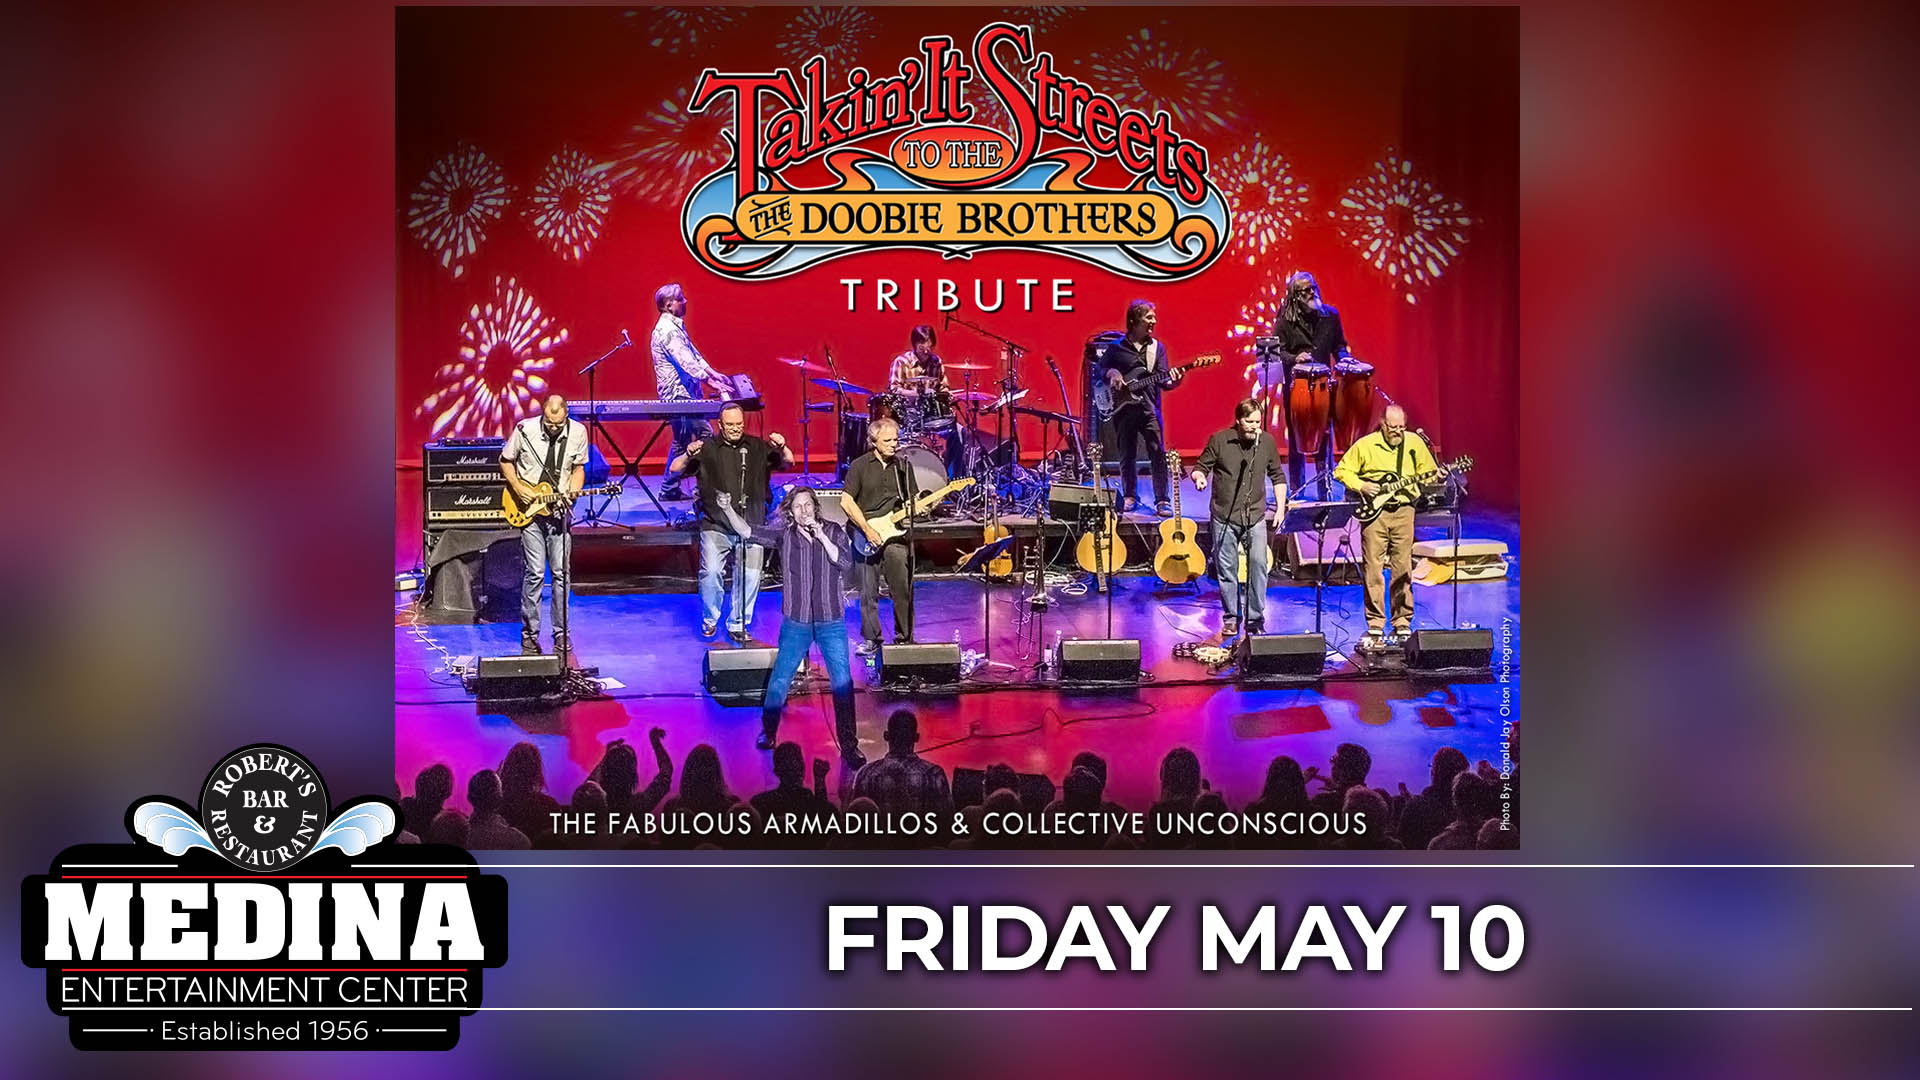 TAKIN' IT TO THE STREETS: The Doobie Brothers Tribute featuring The Fabulous Armadillos & Collective Unconscious Medina Entertainment Center Friday, May 10, 2024 Doors: 7:00PM | Music: 8:00PM | 21+ Tickets on-sale Friday, February 16 at 12PM Gold Reserved $36 / Silver Reserved $31 / General Seating $26 plus applicable fees